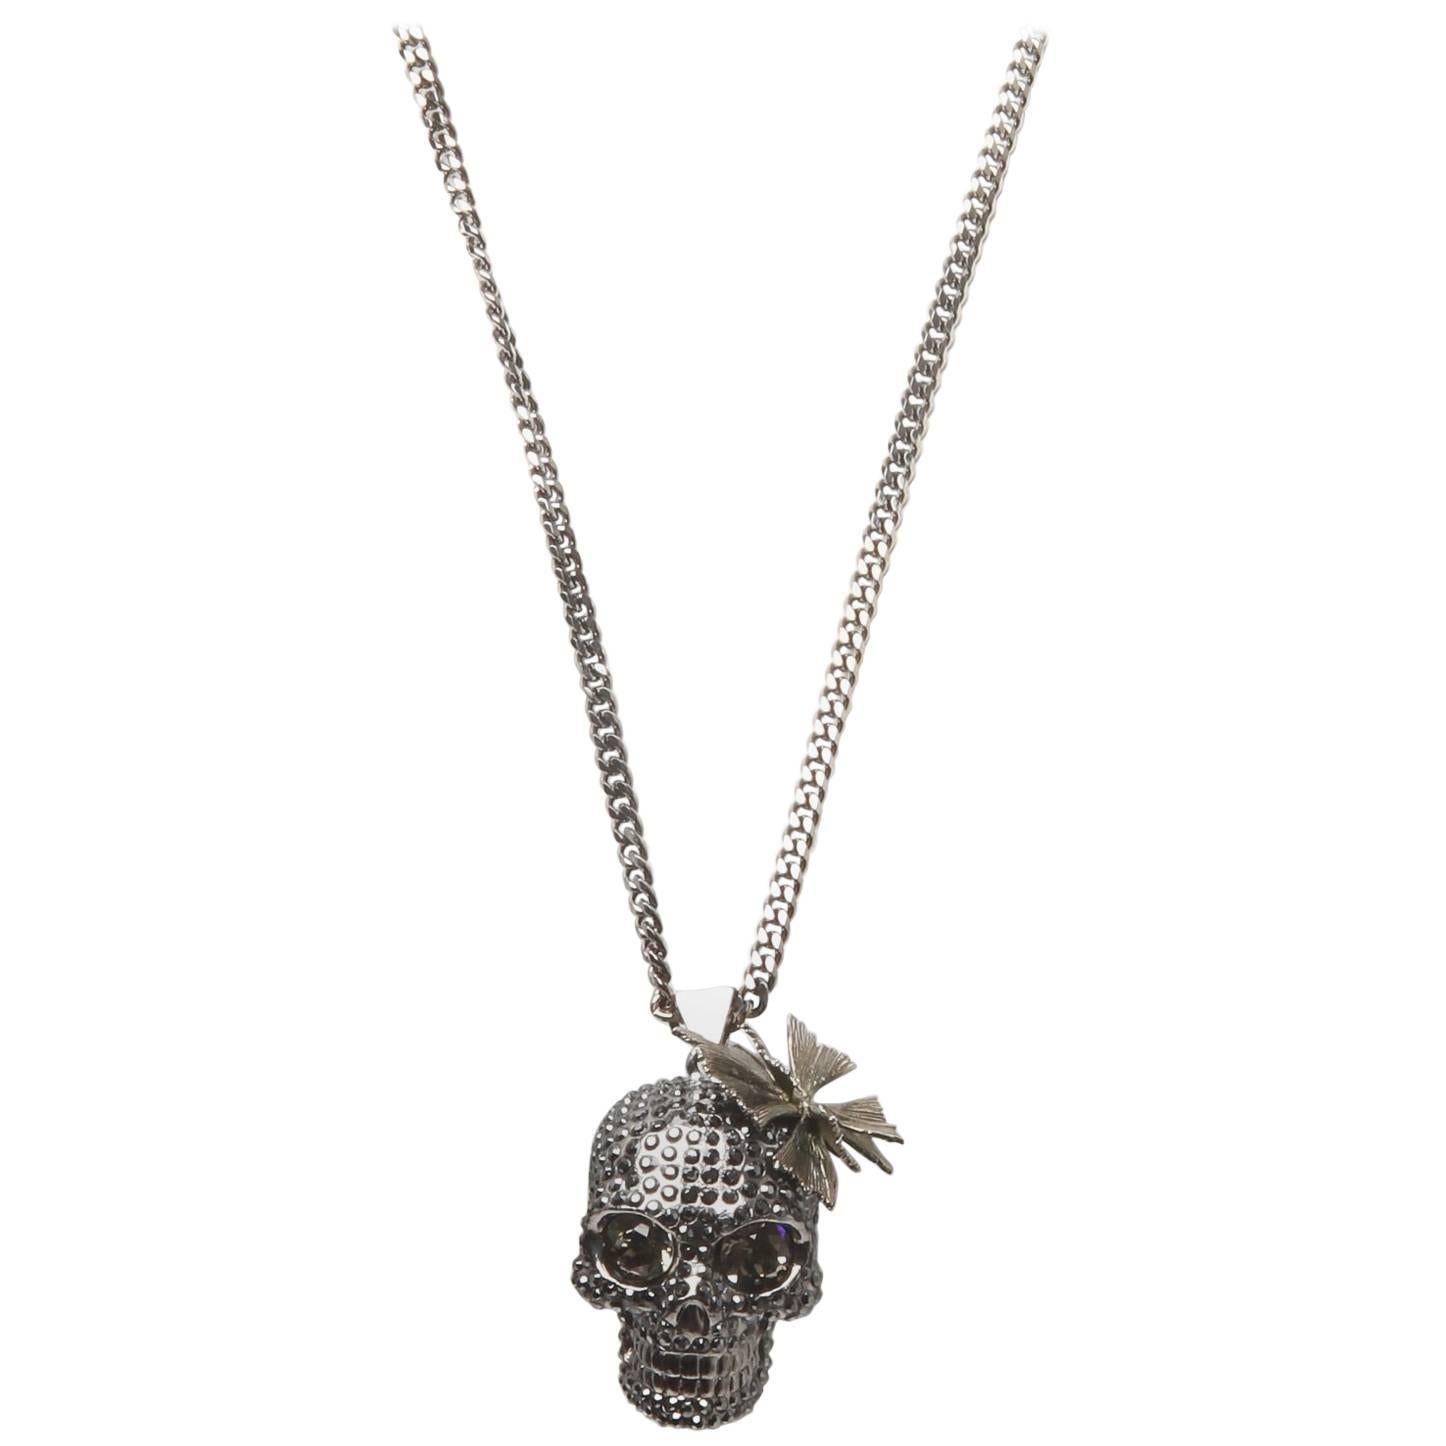 Alexander McQueen Skull with Butterfly Pendant Necklace